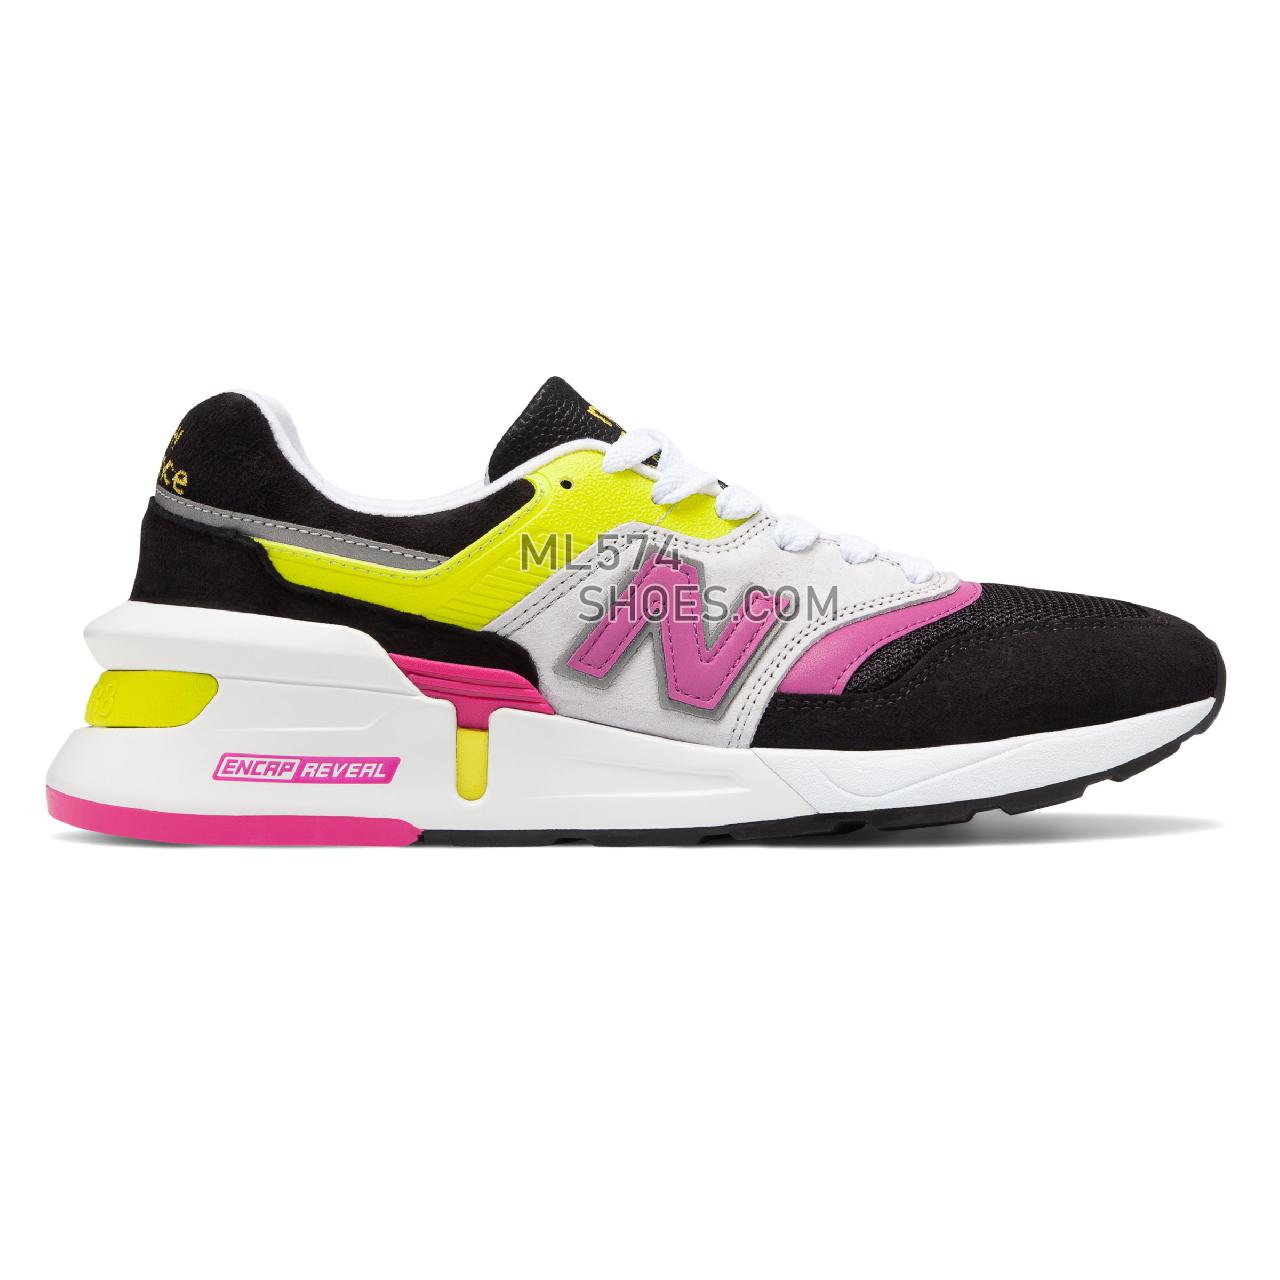 New Balance Made in US 997 Sport - Men's Made in US 997 Sport Classic - Black with Yellow - M997SKP